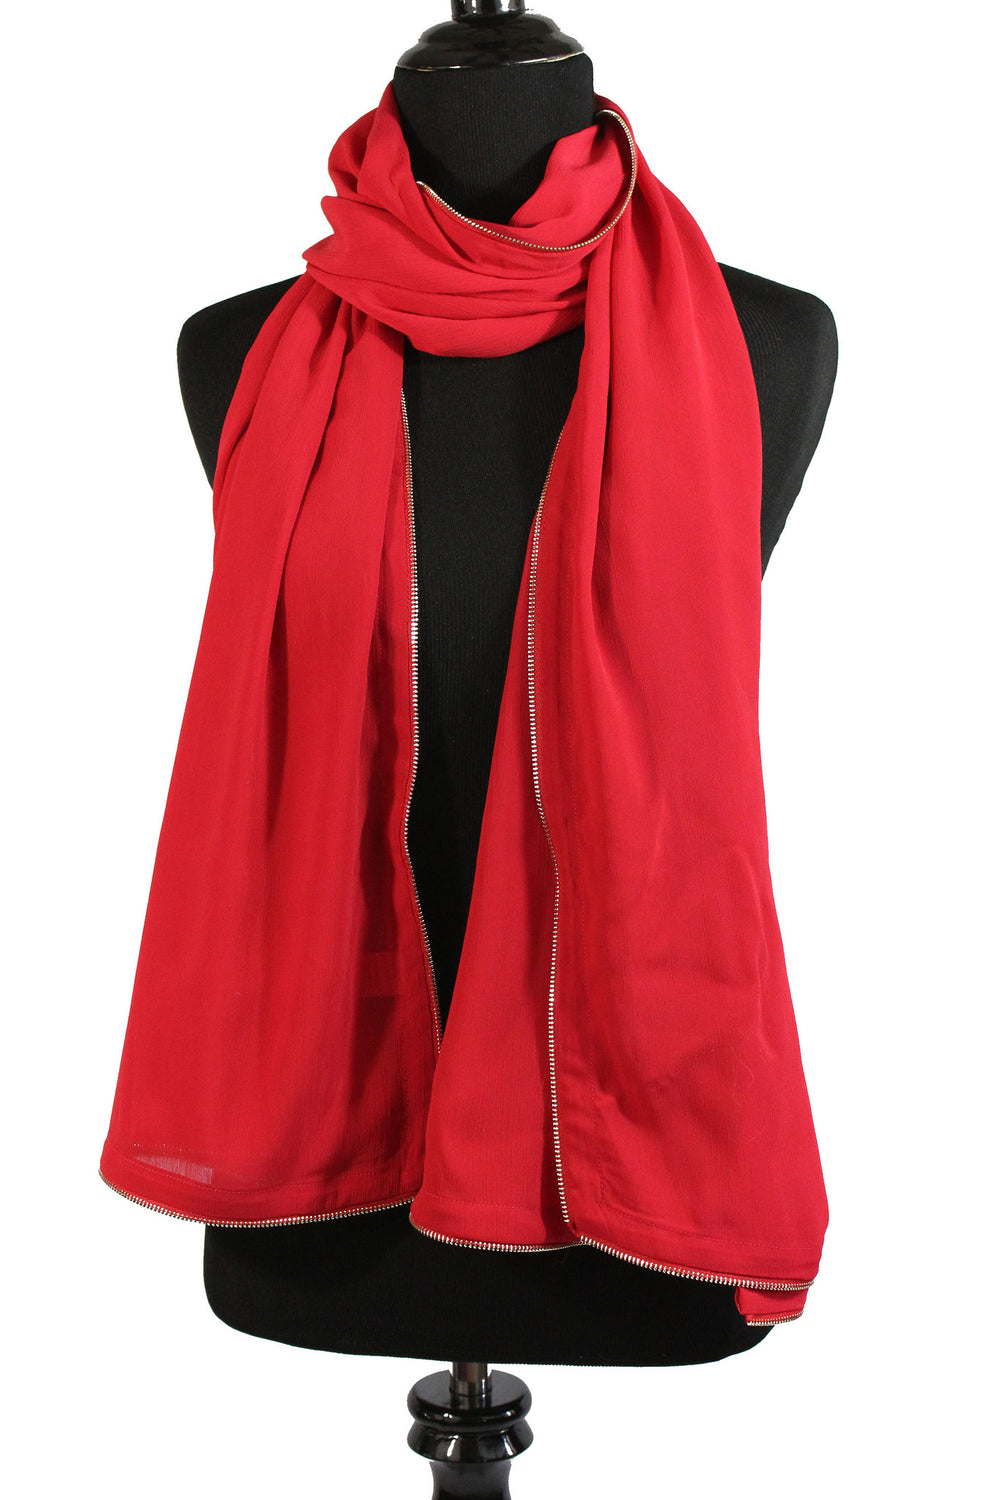 red chiffon hijab with gold zipper embellishment along the edges